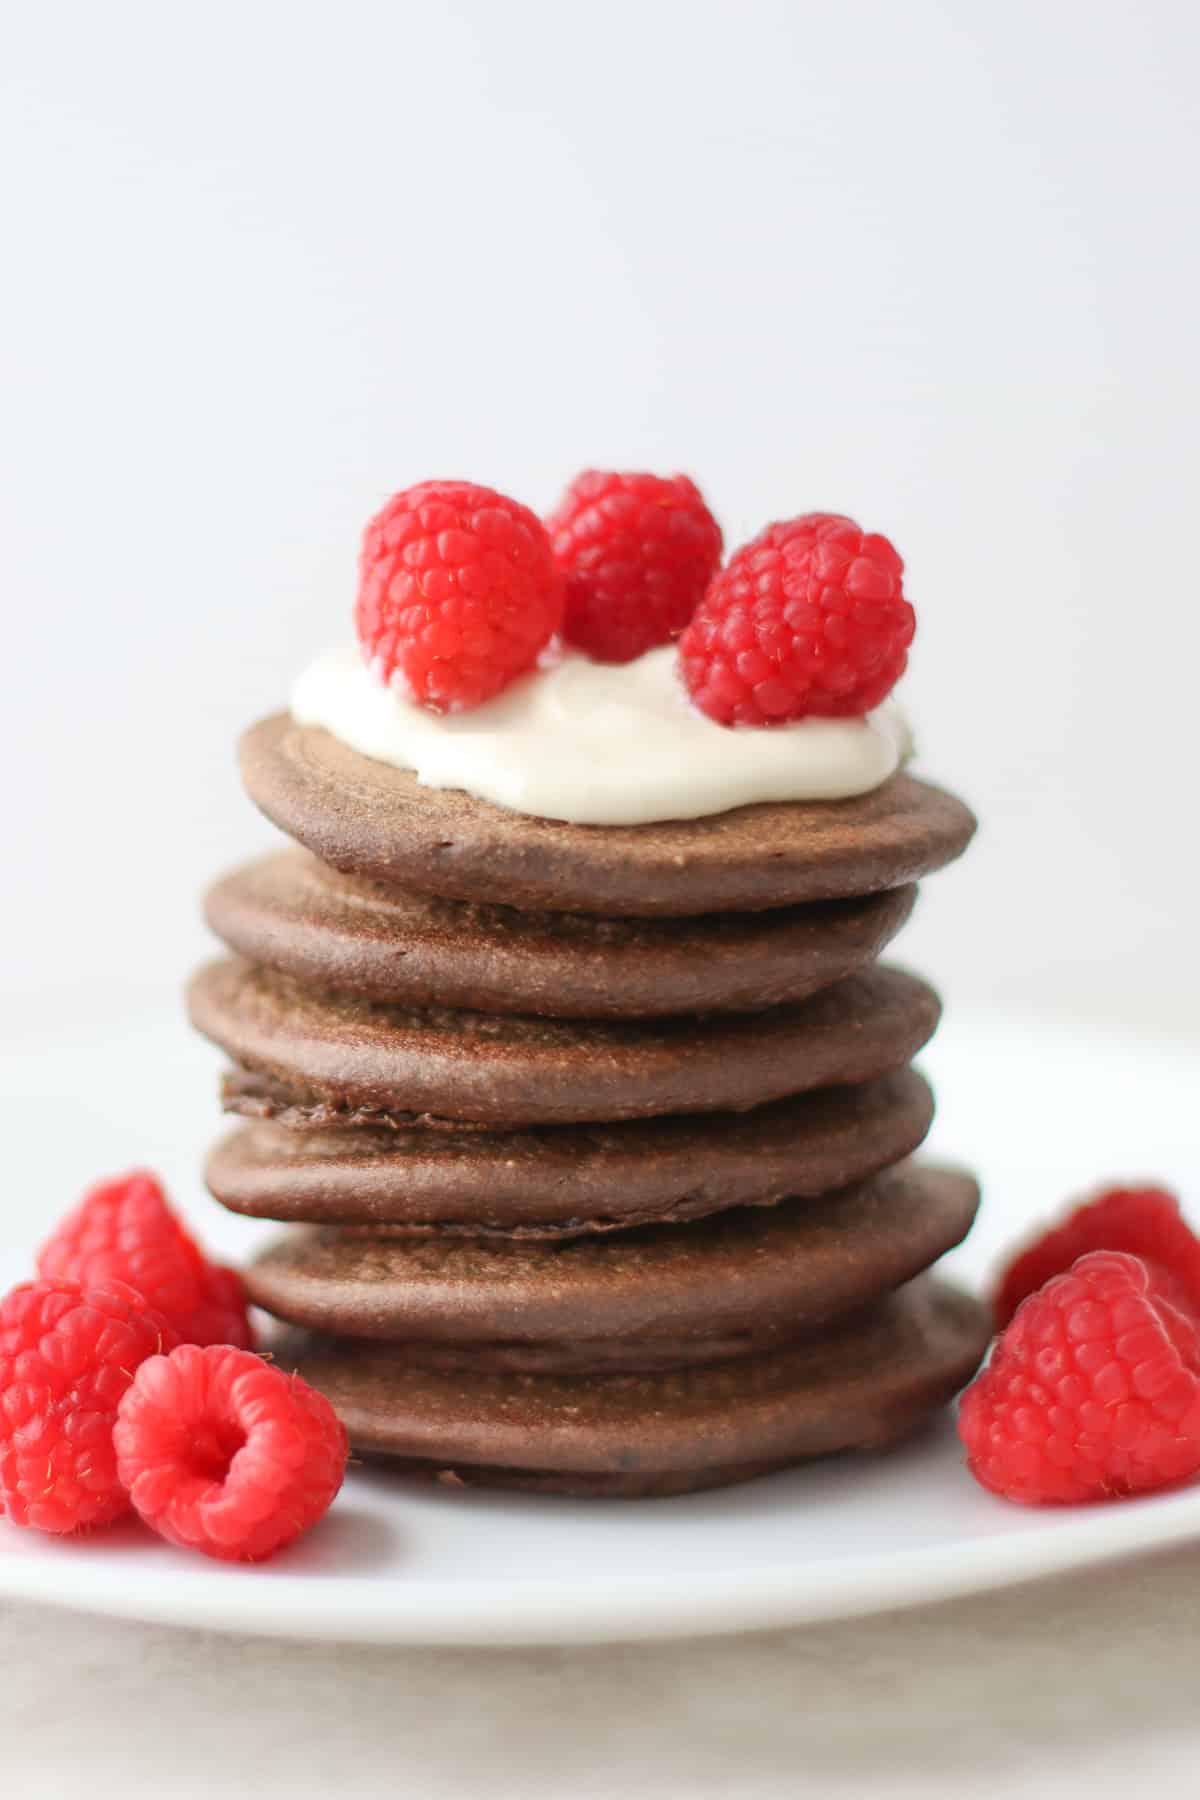 Stacked  pancakes topped with yogurt and raspberries.